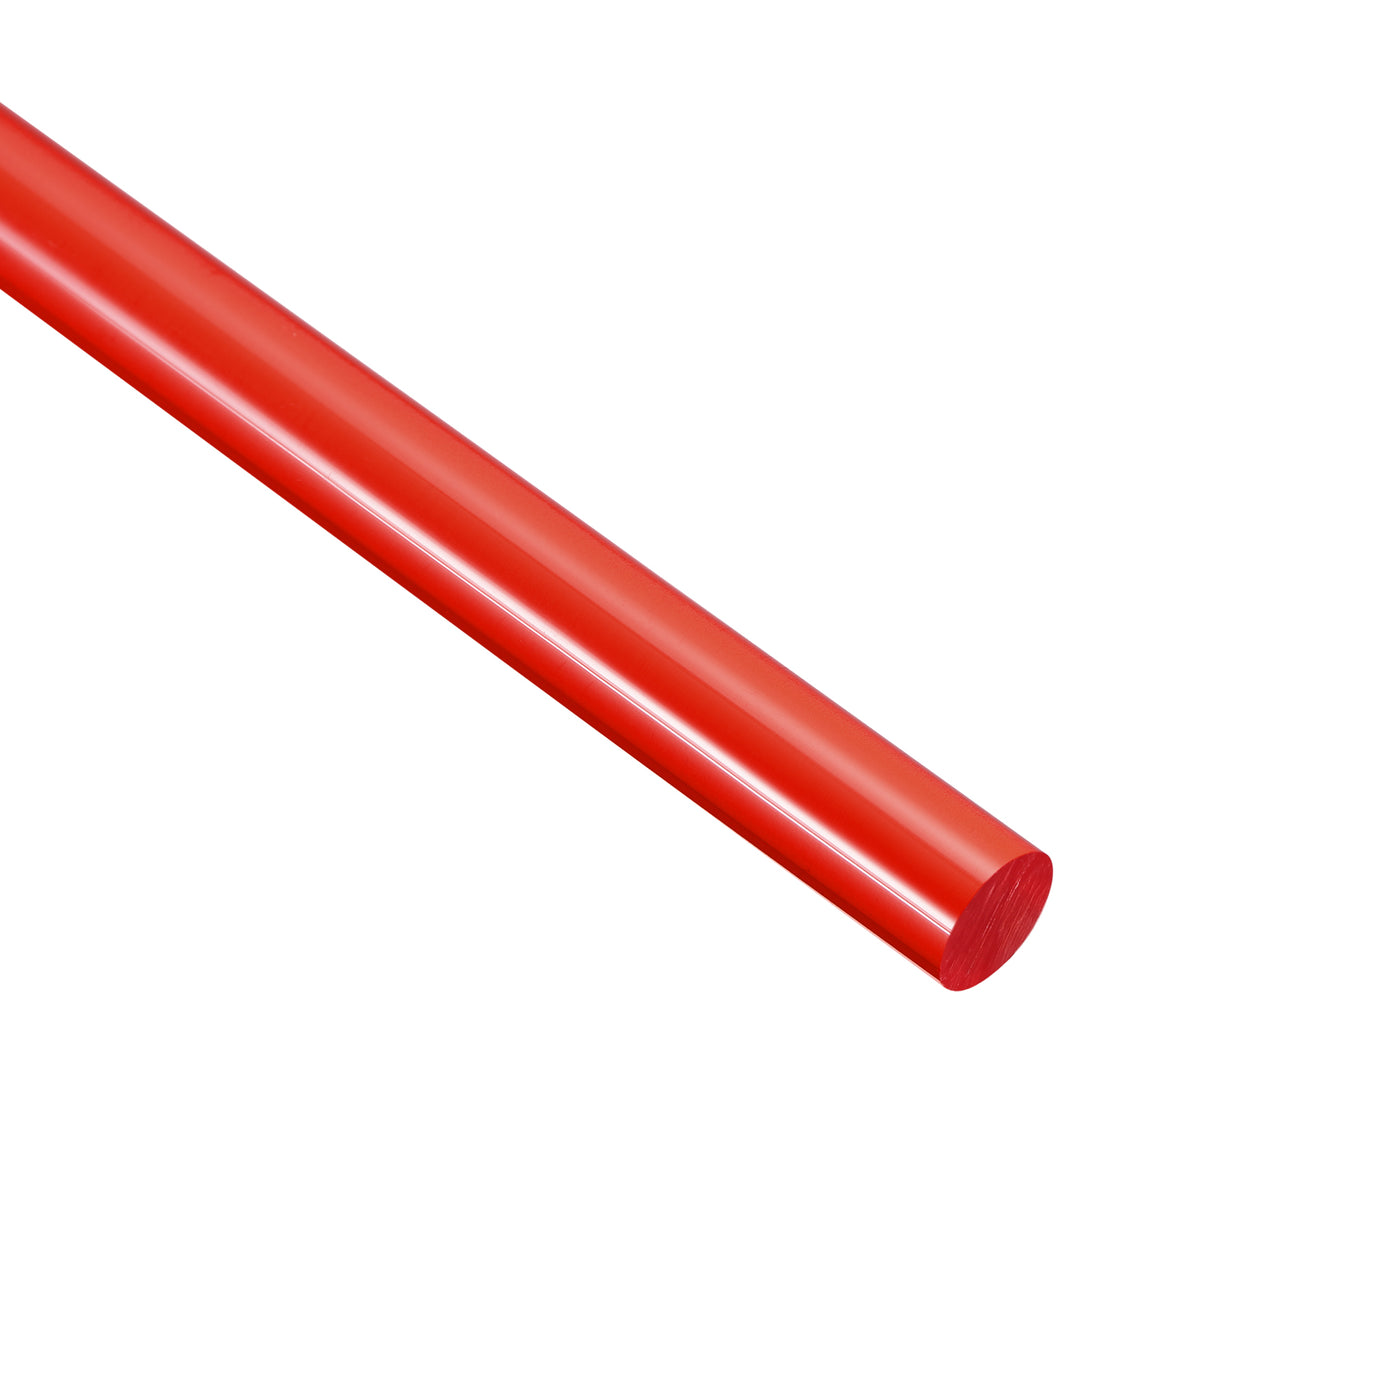 uxcell Uxcell Acrylic Round Rod,Colorful,1/4" Diameter 11-5/8" Length, Solid Plastic PMMA Bar Stick